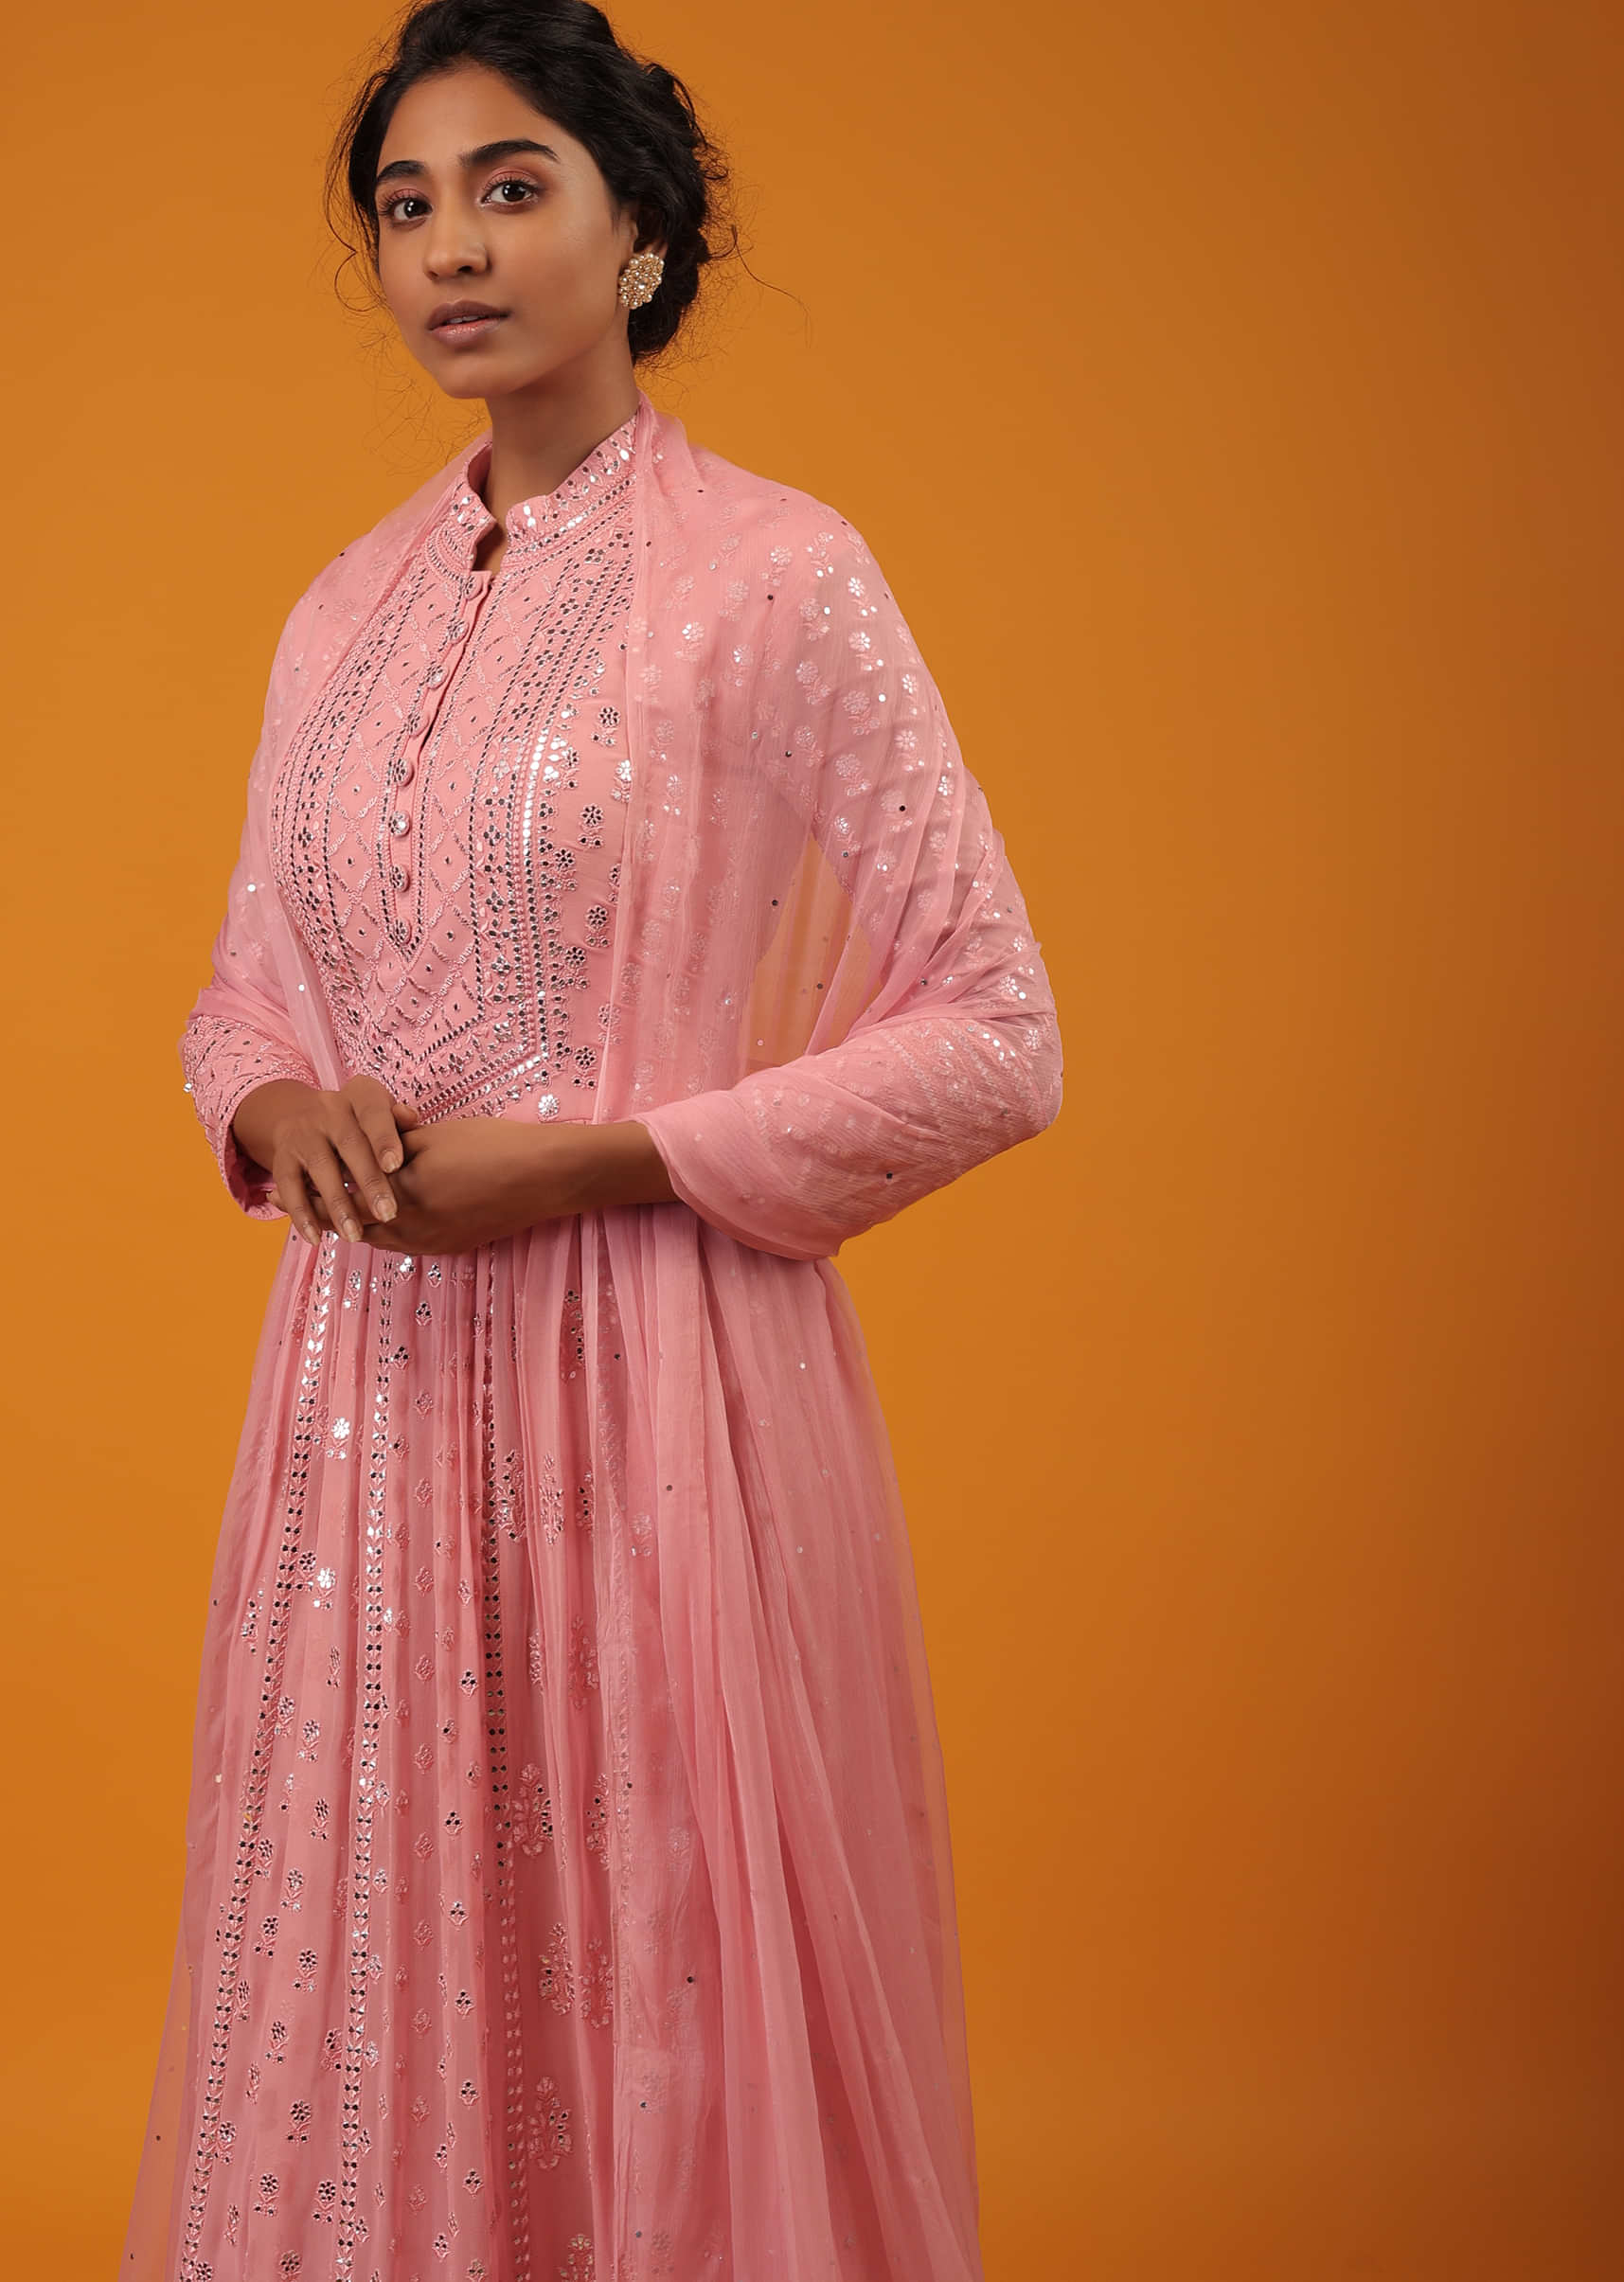 Strawberry Ice Pink Anarkali Suit With Mandarin Collar And Gotta Work In Floral Pattern